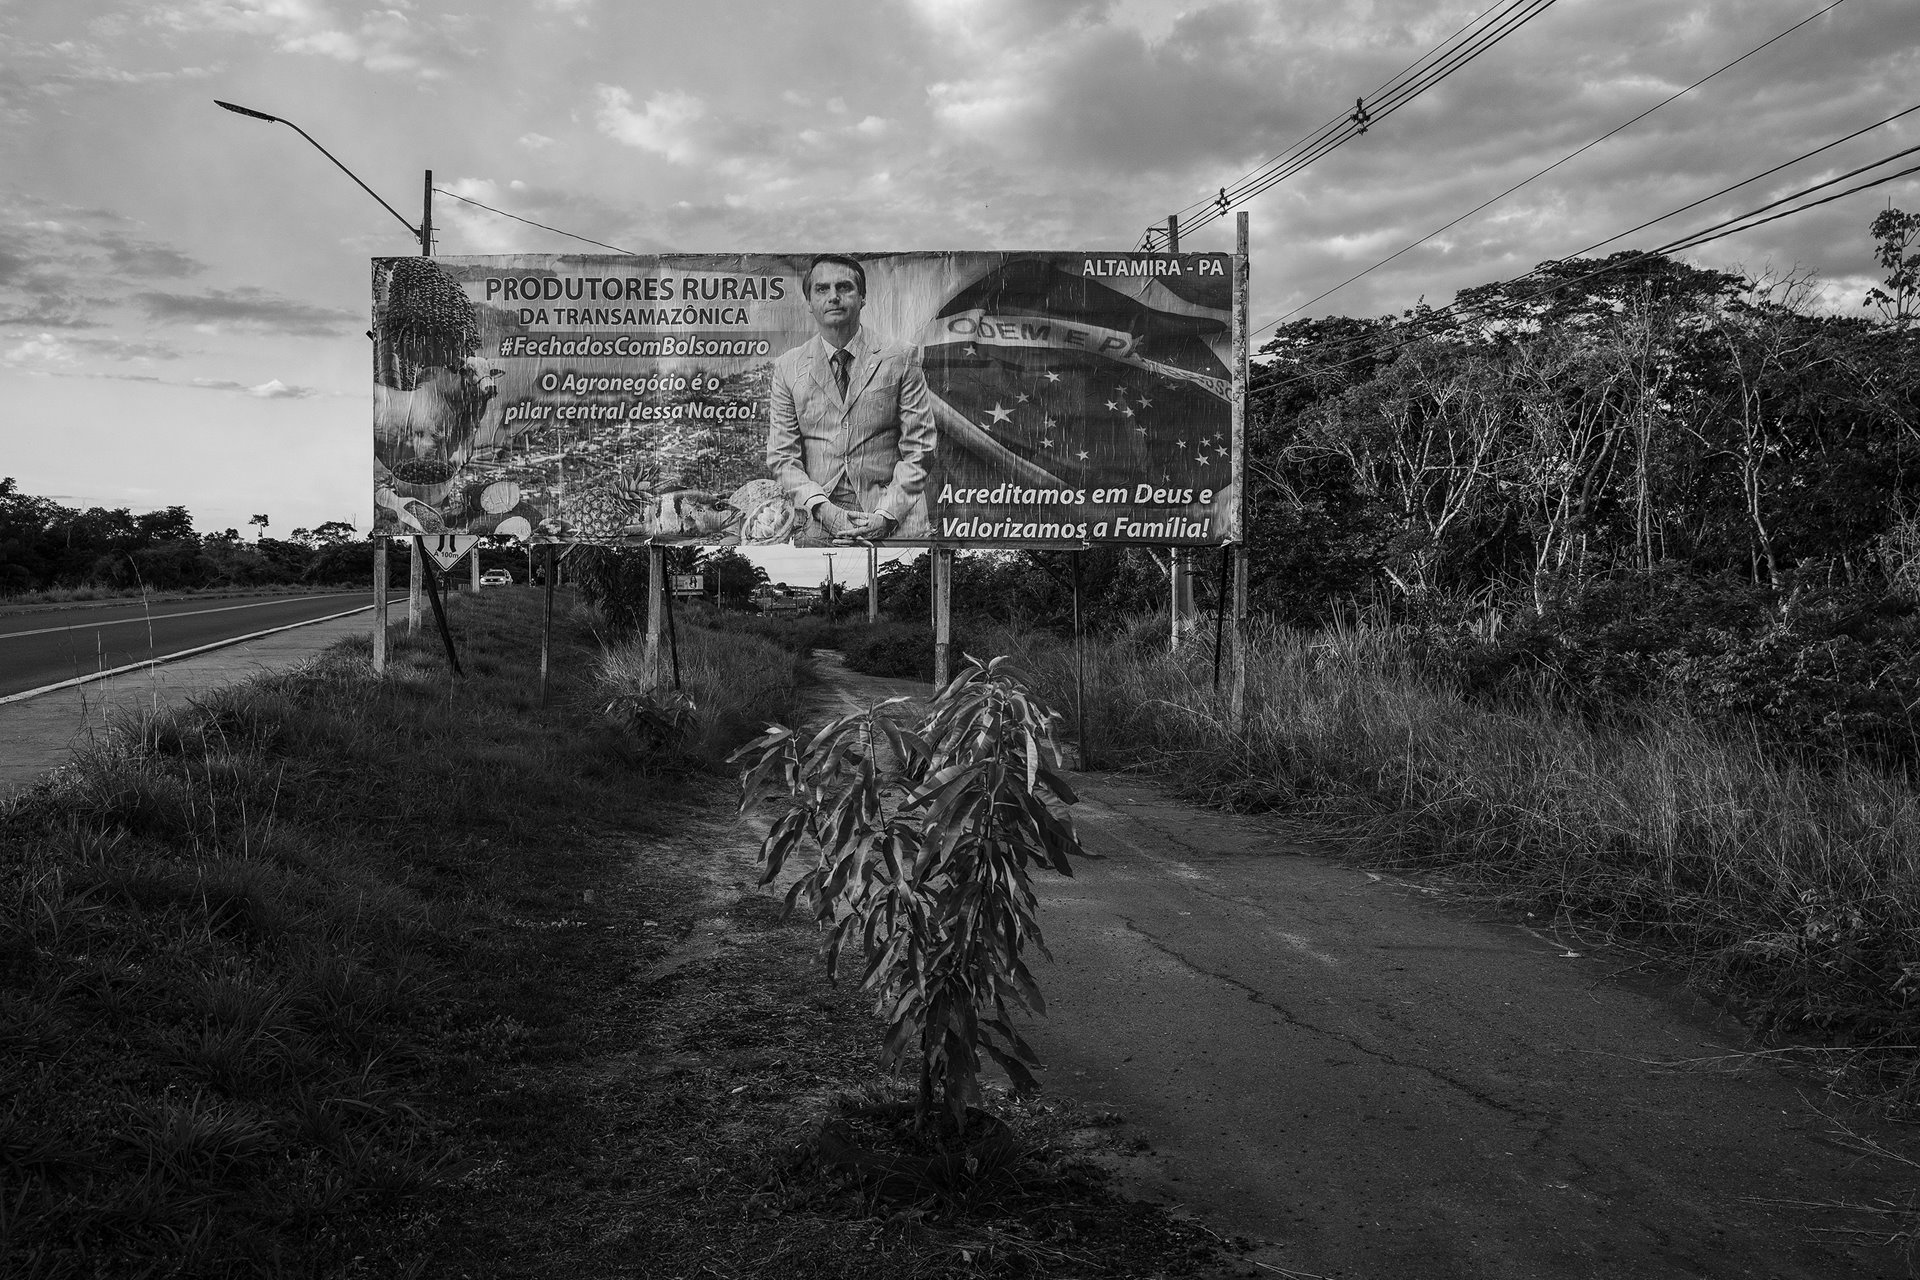 A billboard with a message of support to President Bolsonaro stands alongside the Trans-Amazonian Highway, Altamira, Pará, Brazil. It was financed by local farmers. Agribusiness is one of the president&rsquo;s main pillars of political support.